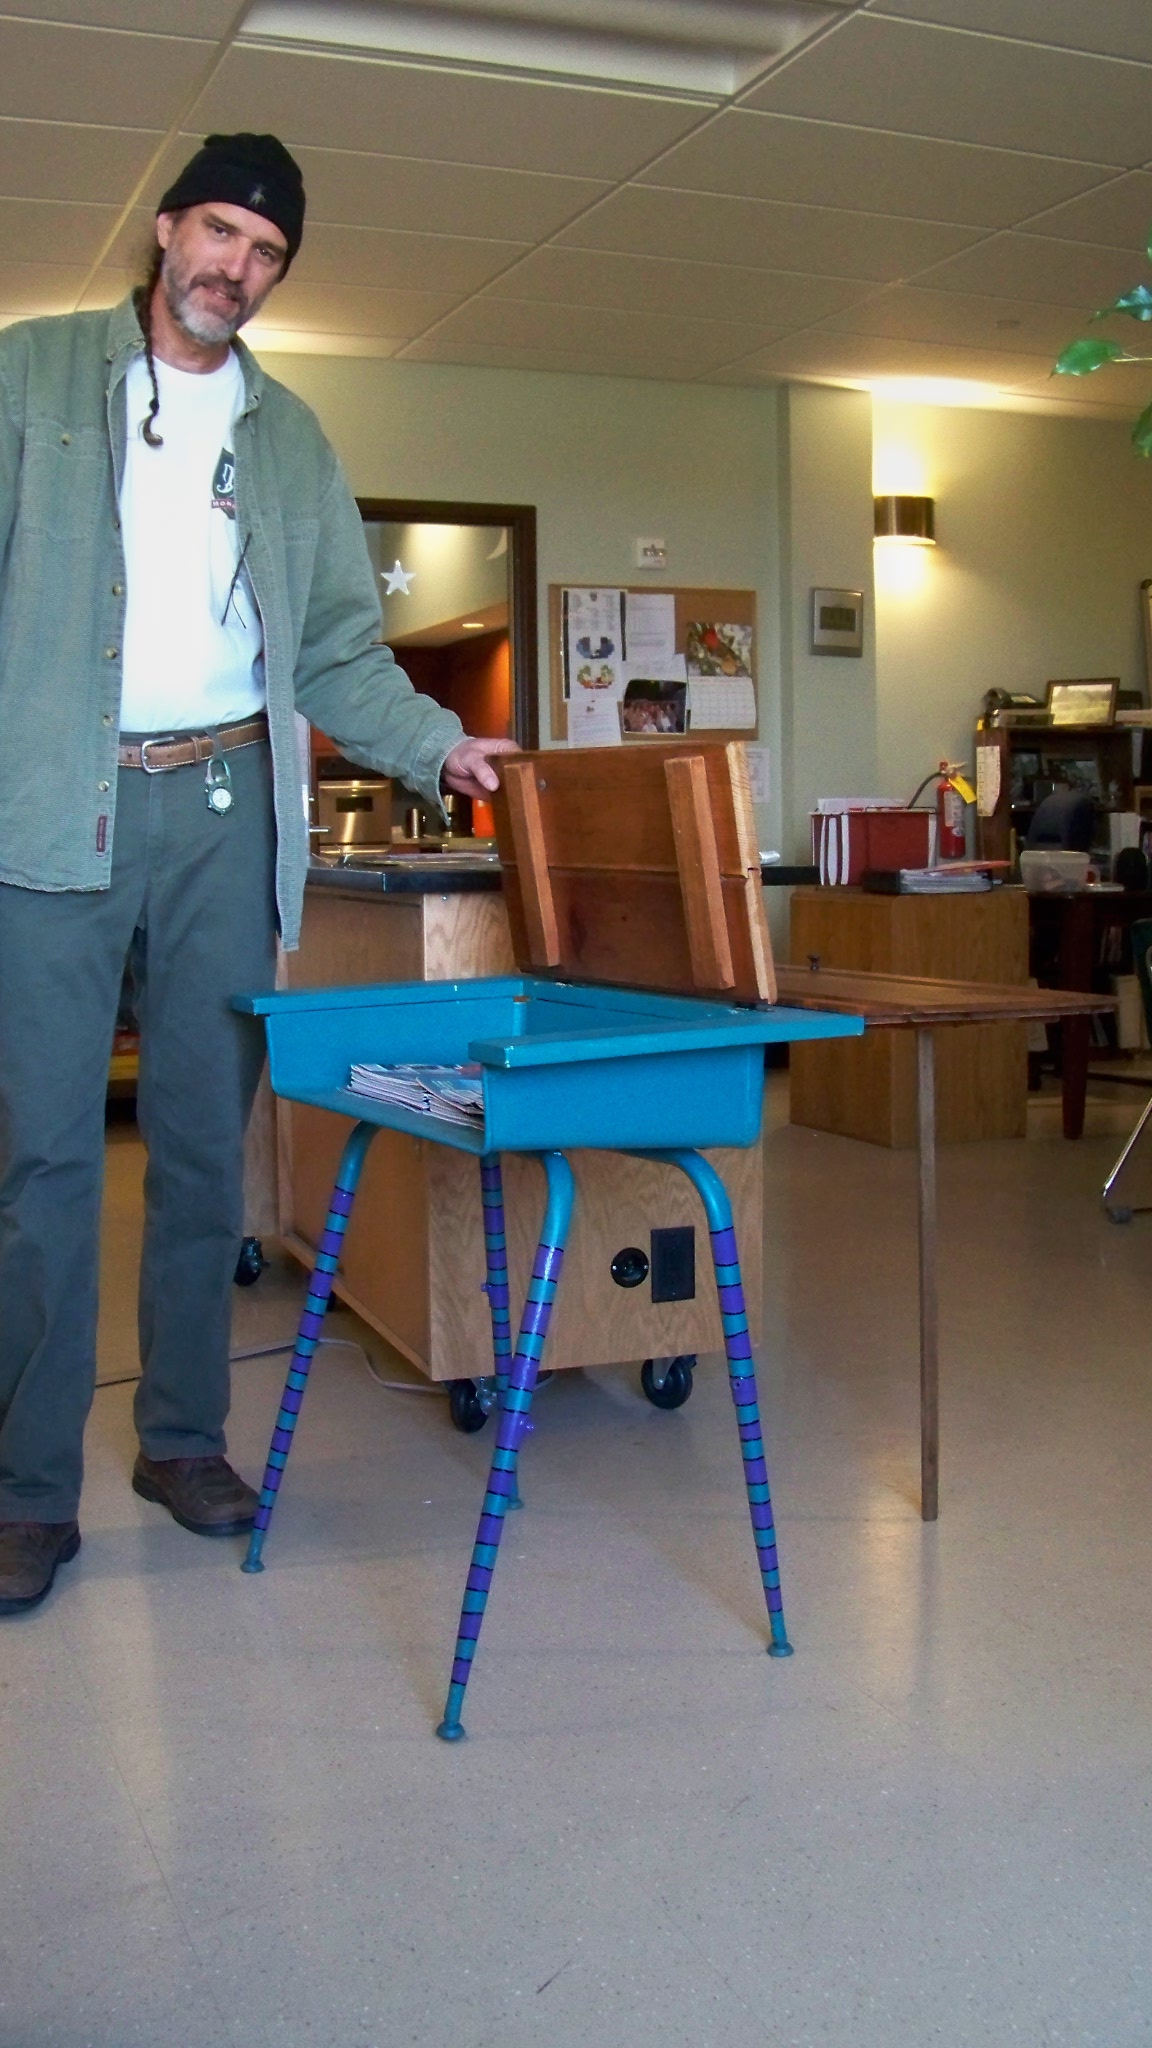 a man standing next to a table that's painted blue